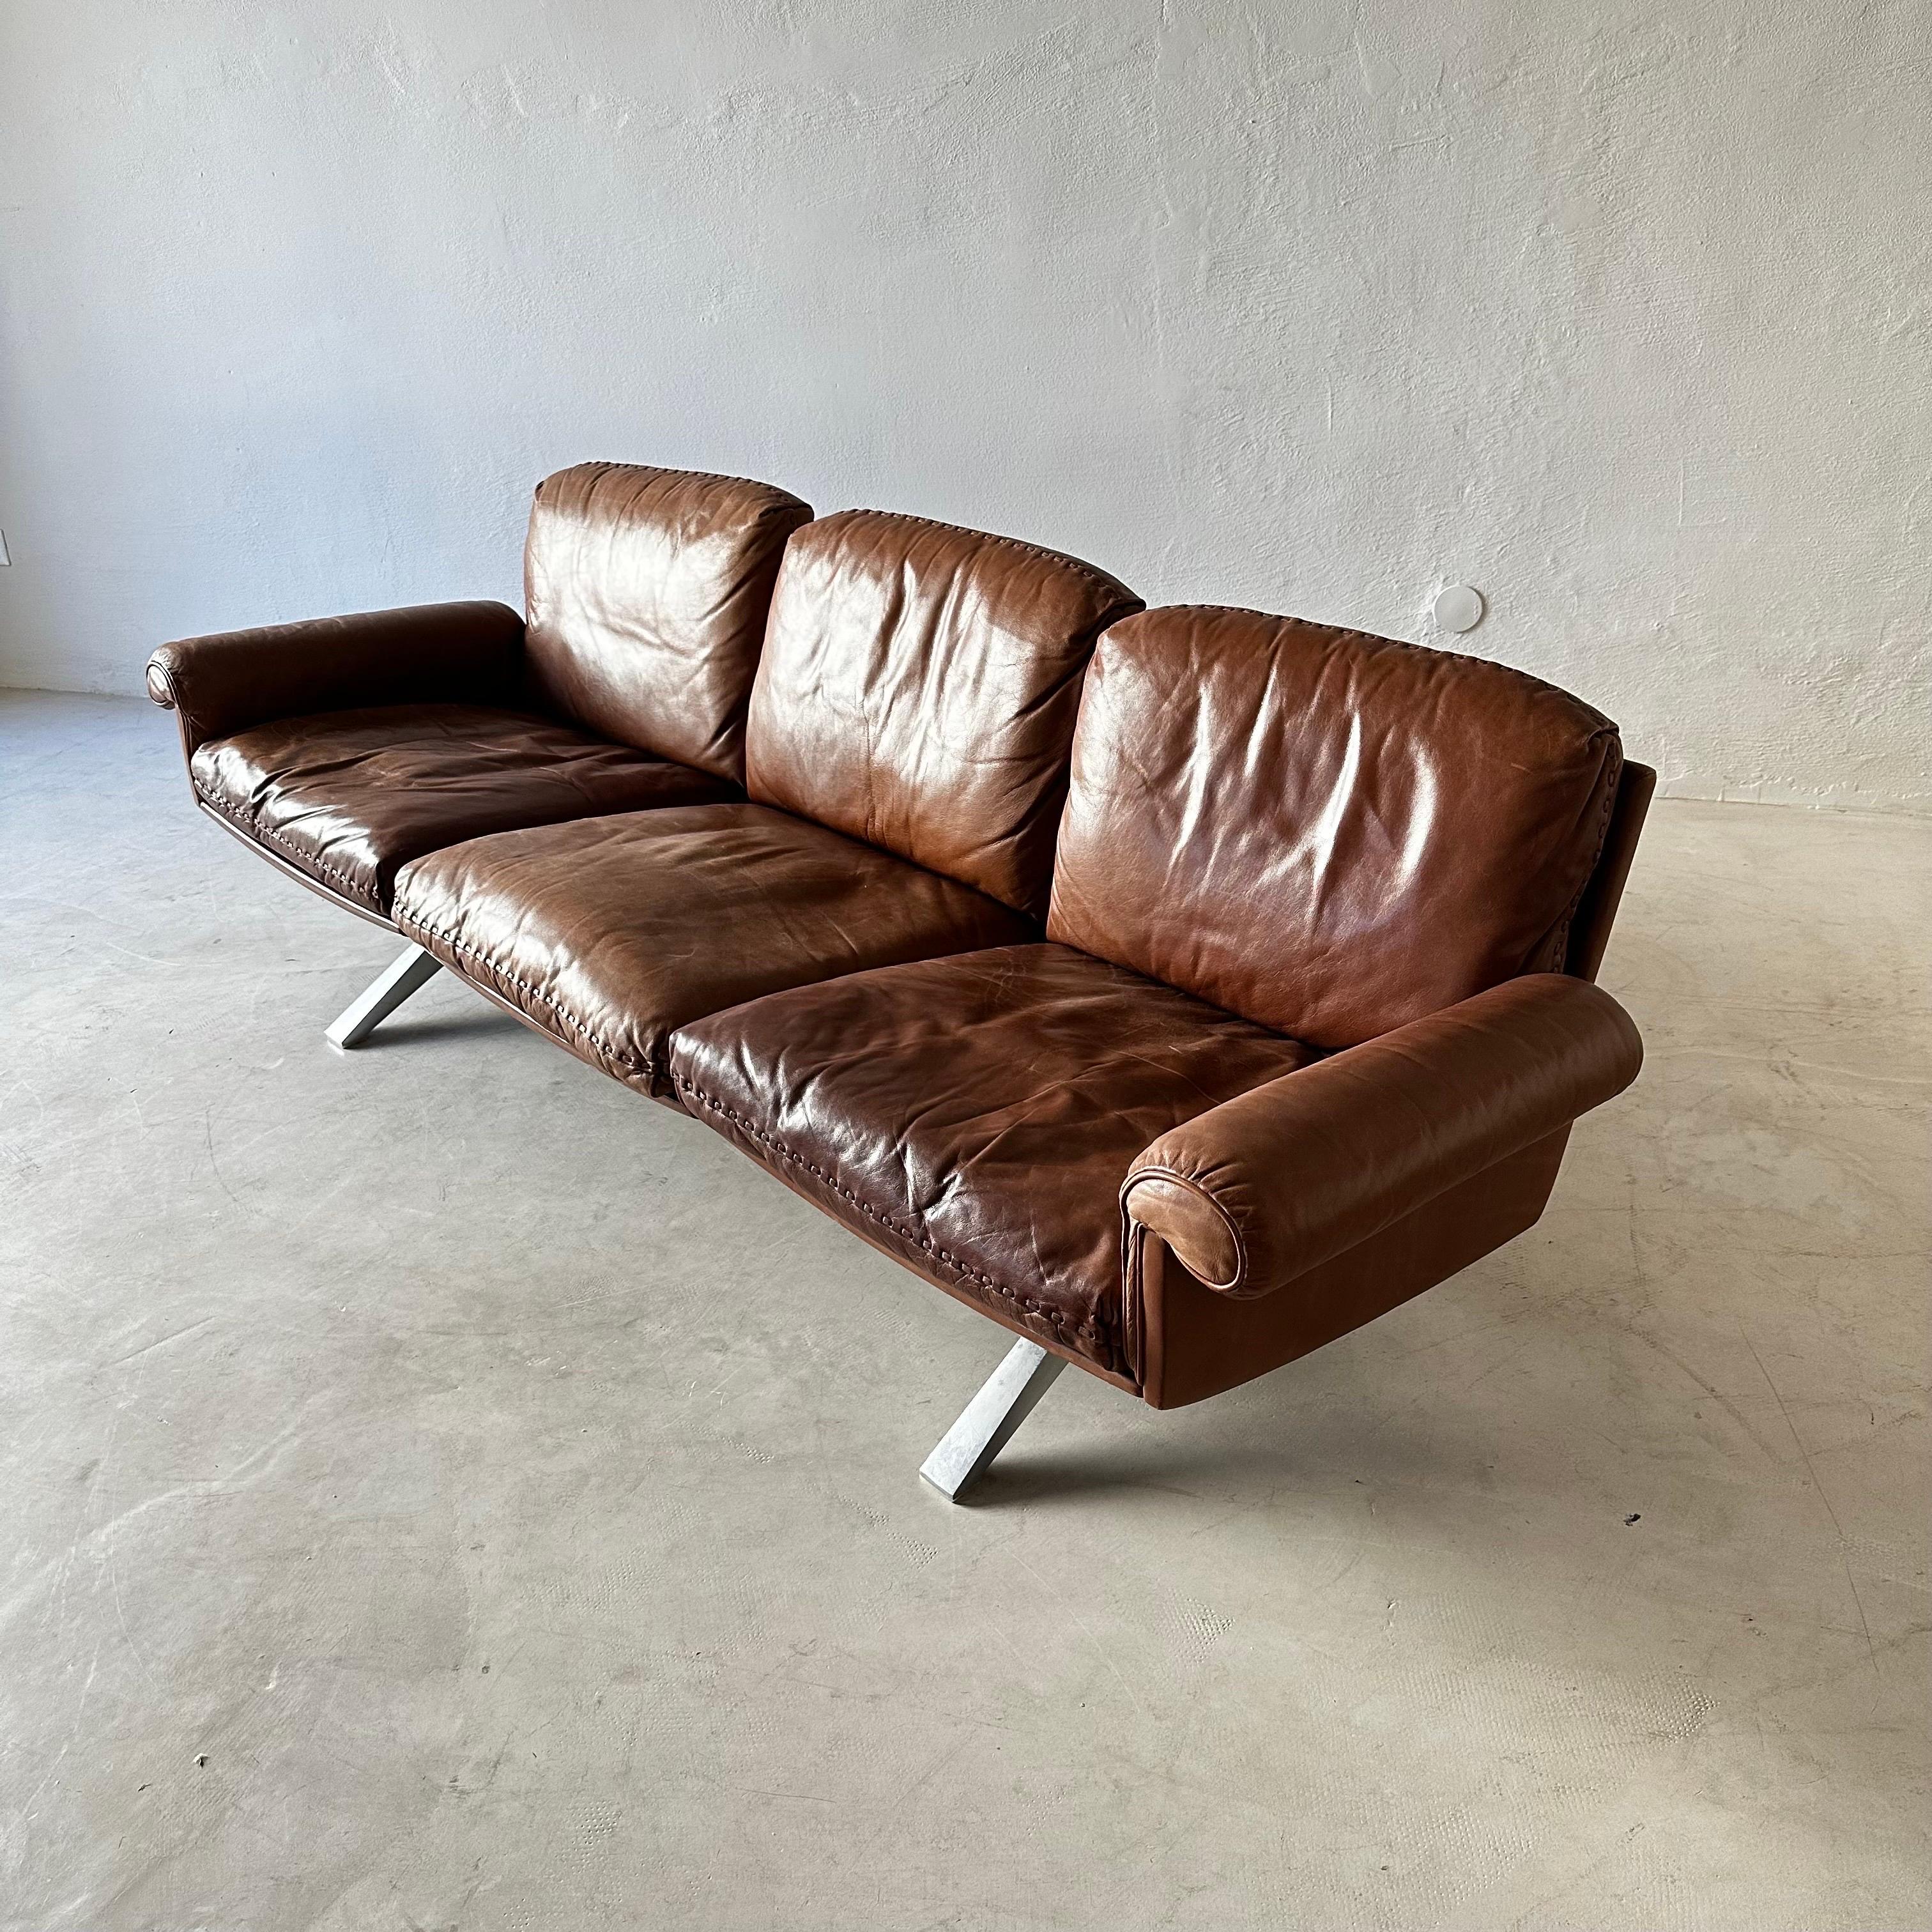 Rare vintage 1970s De Sede DS-31 designer sofa in dark cognac brown leather. Beautifully patinated in soft luxury leather.